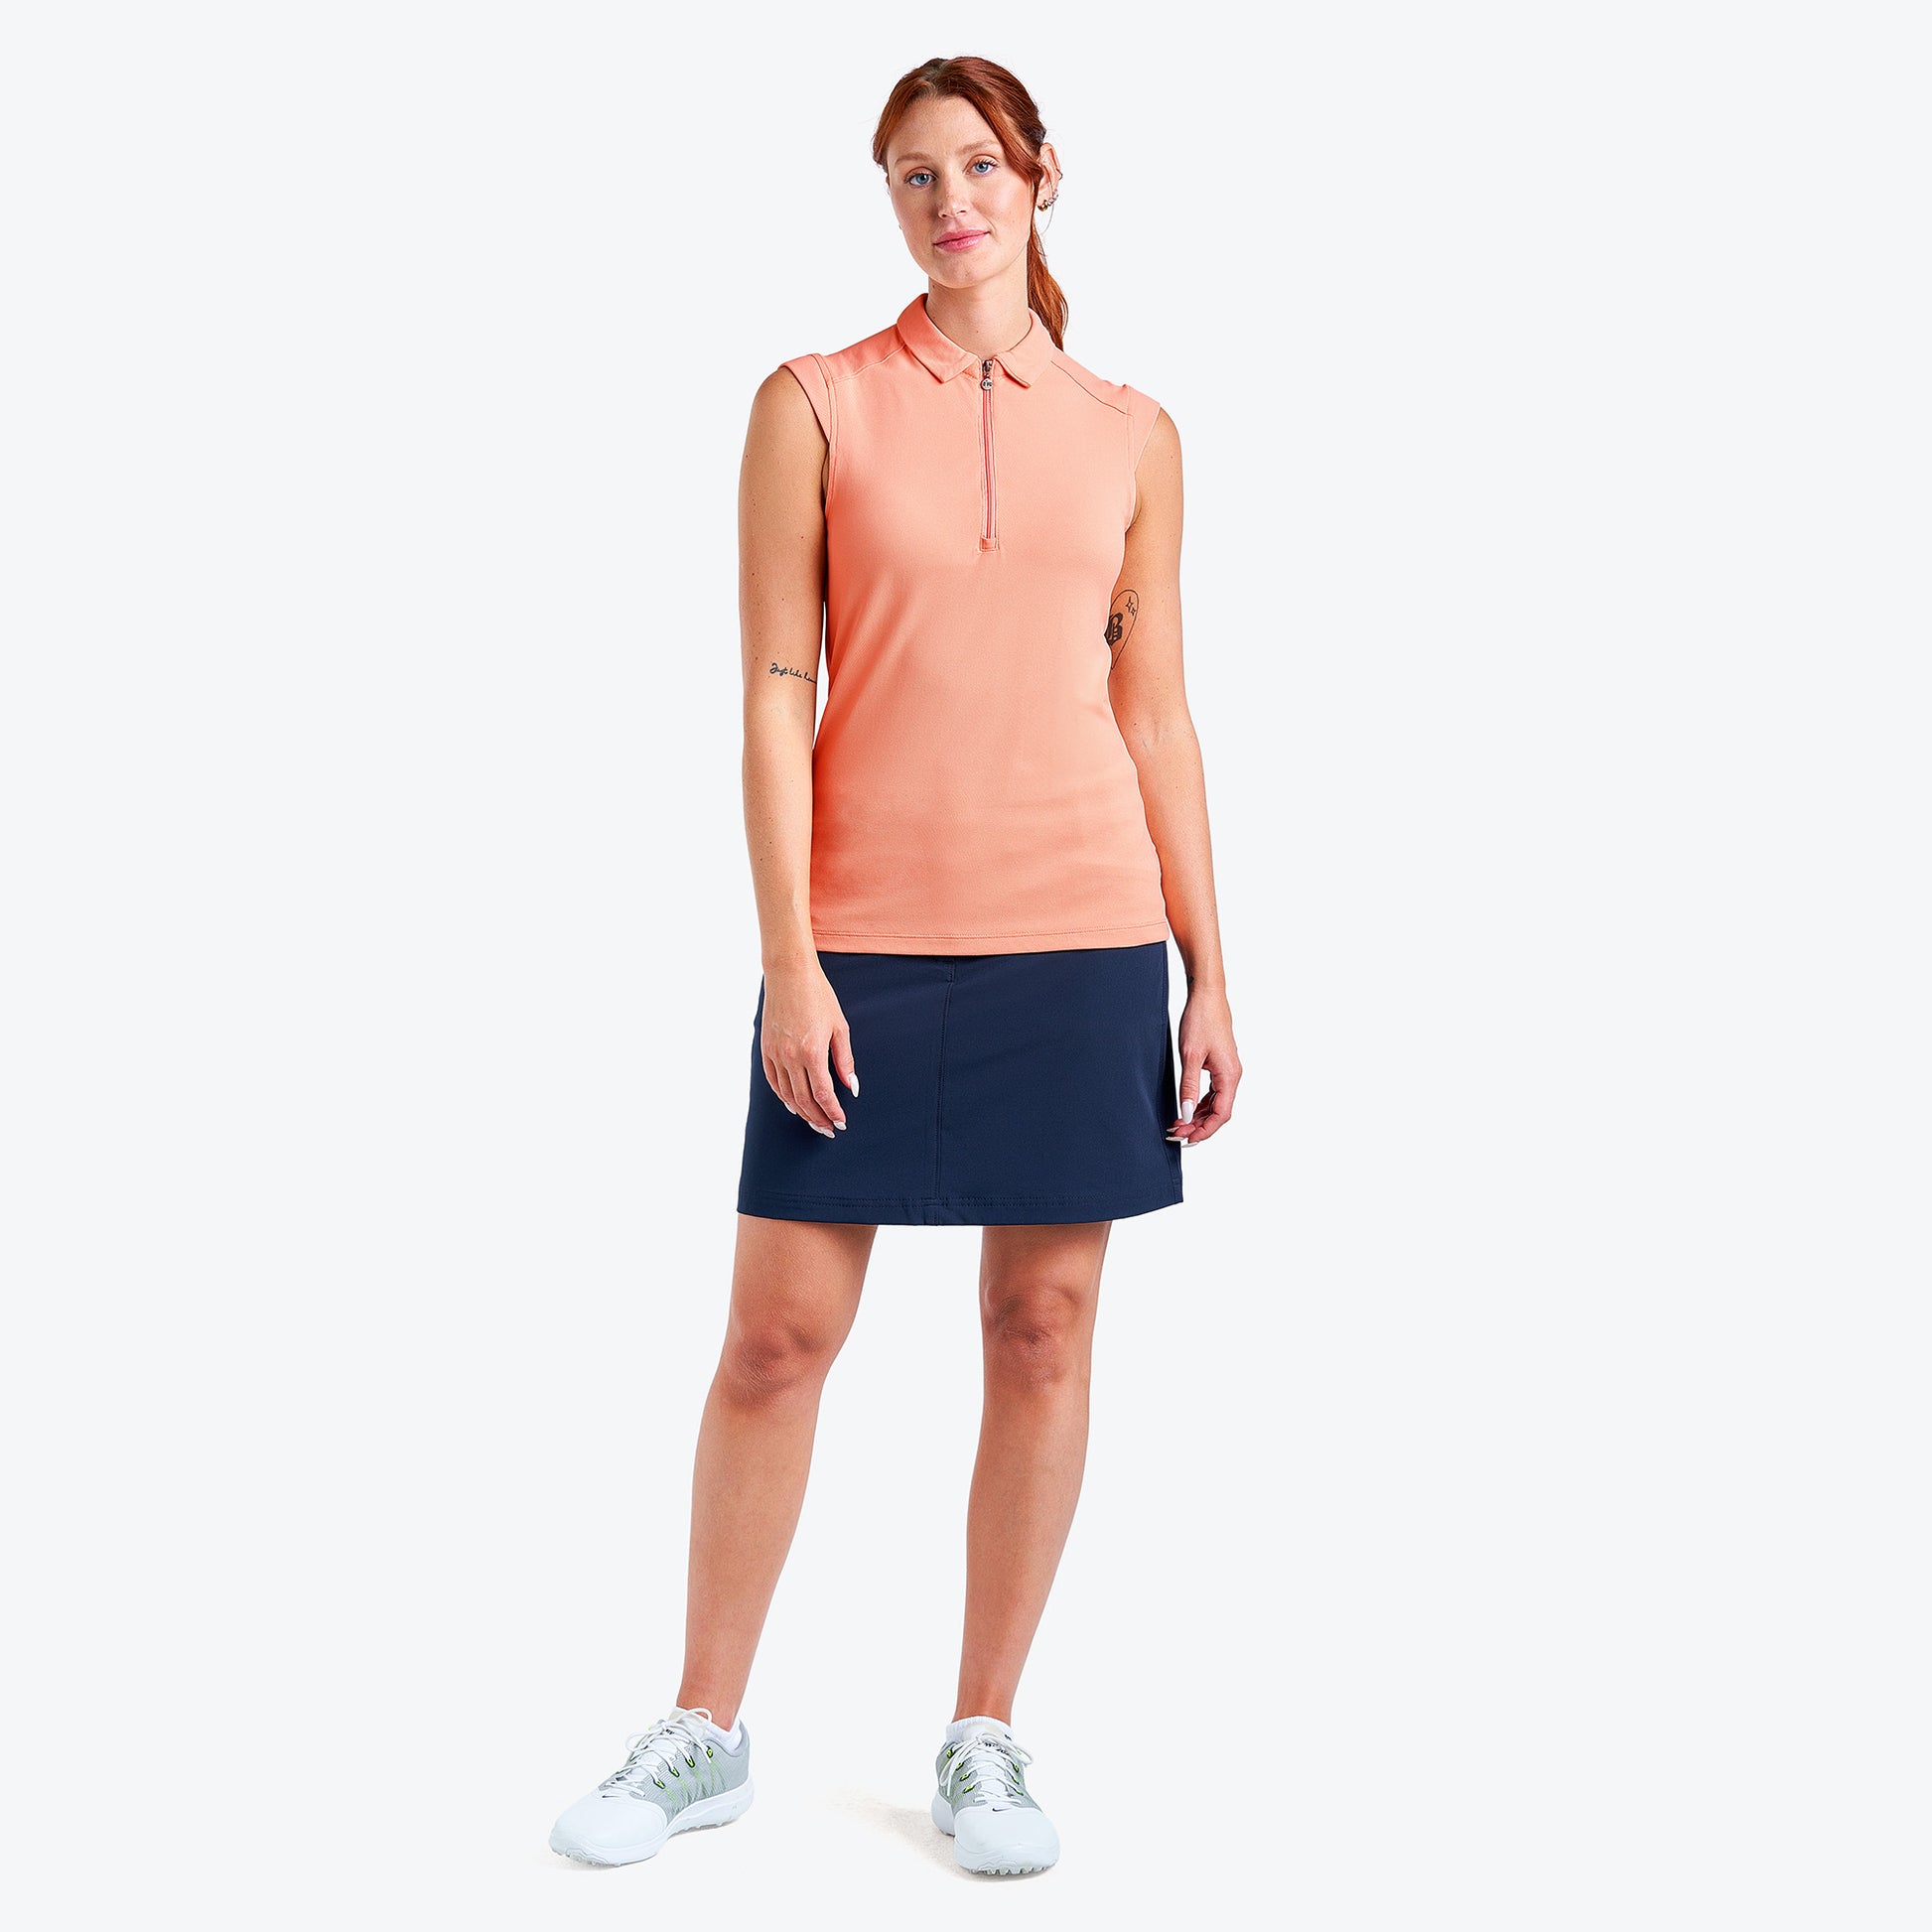 Nivo Ladies Sleeveless Piqué Polo with UPF 50+ in Coral Reef